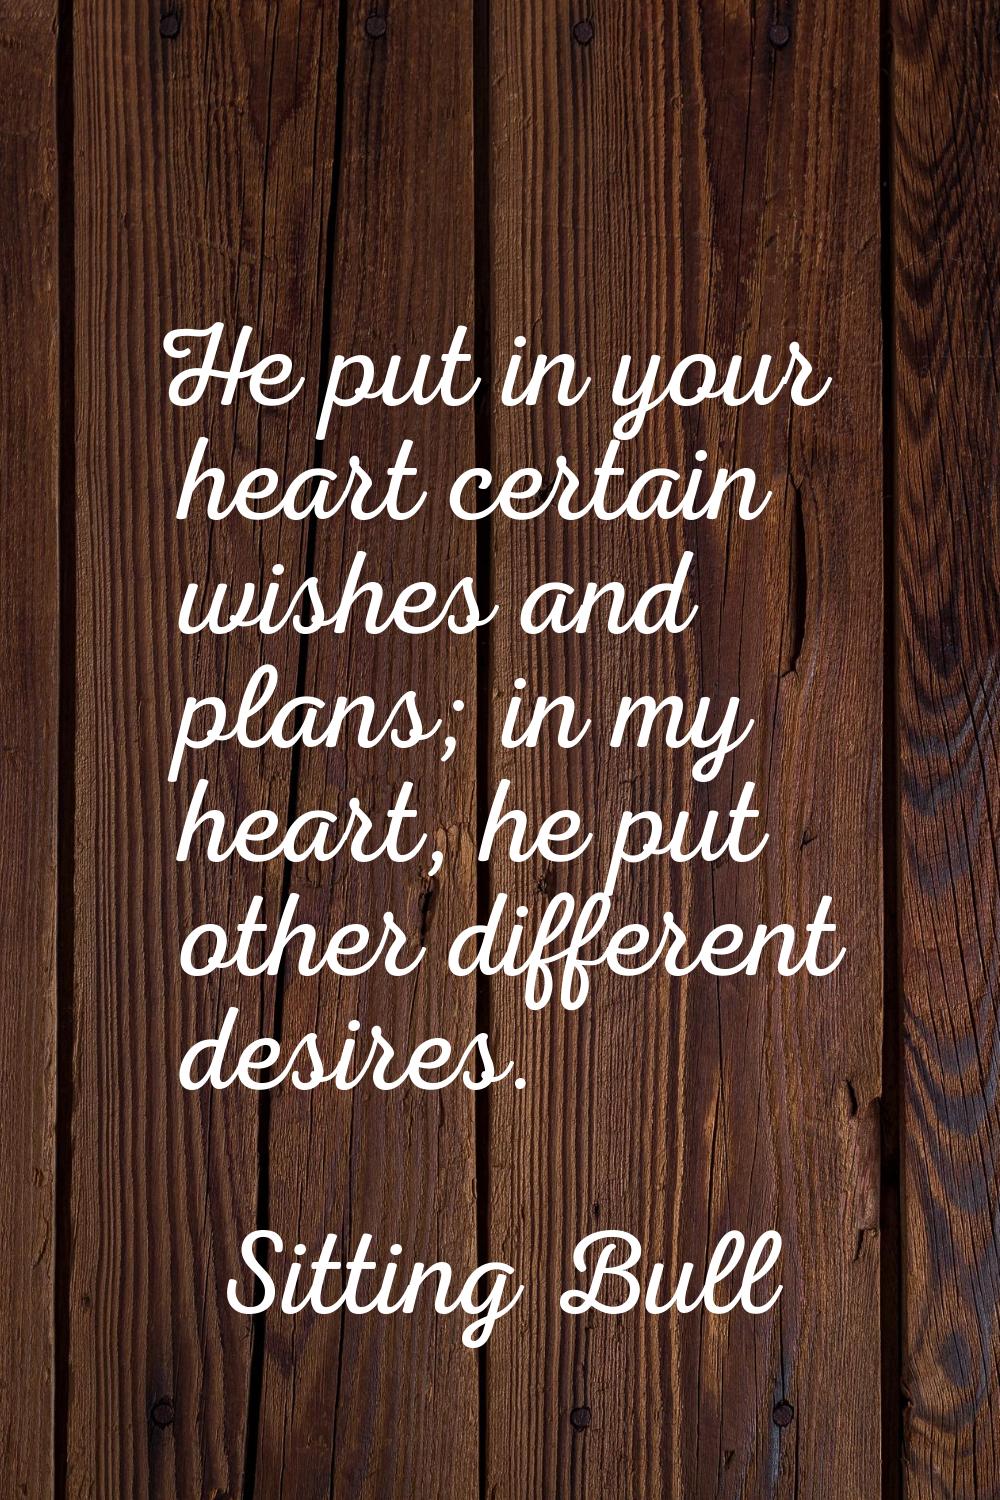 He put in your heart certain wishes and plans; in my heart, he put other different desires.